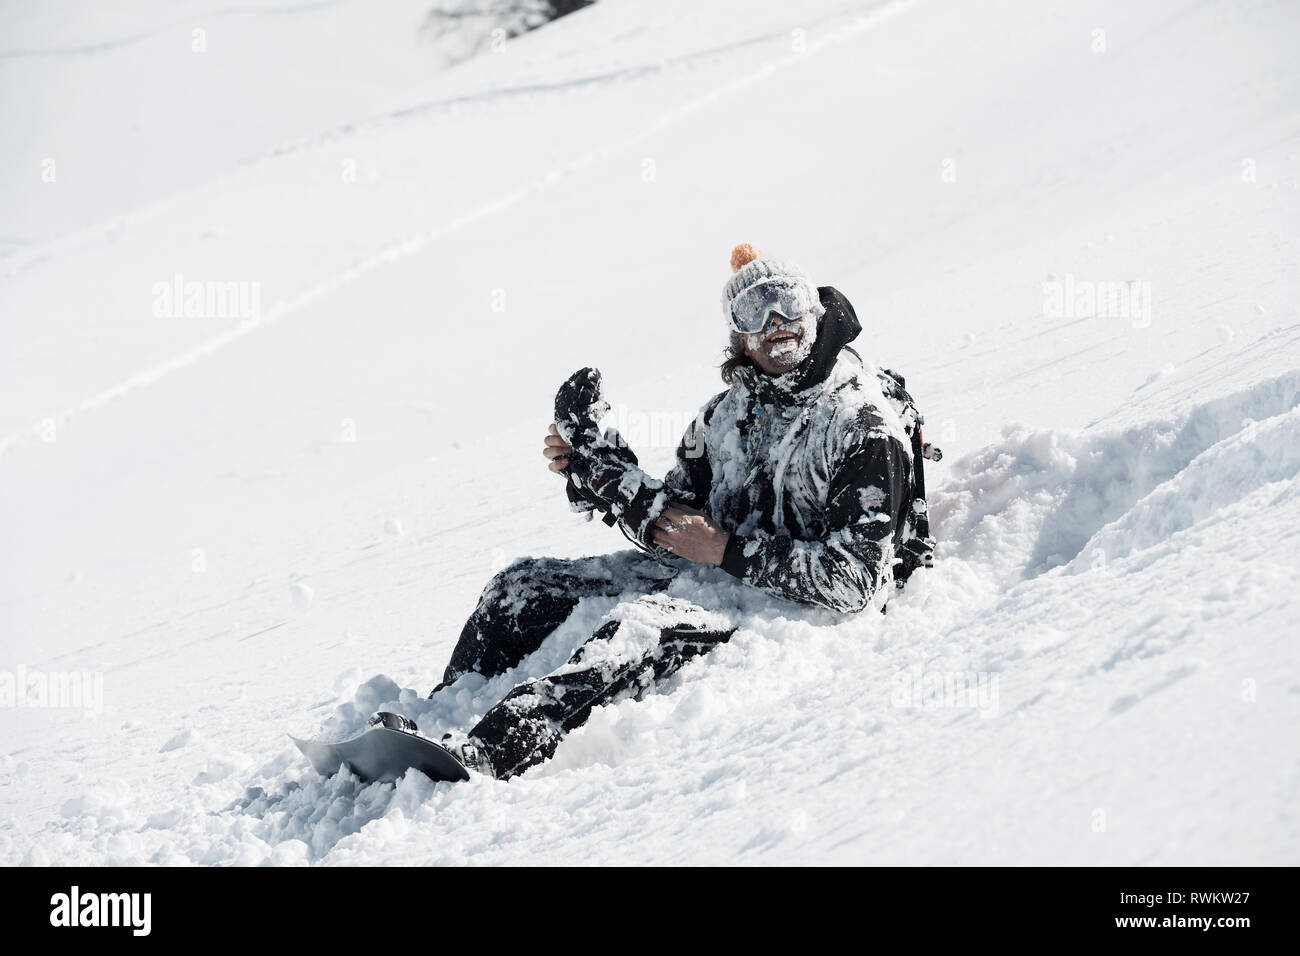 Male snowboarder covered in snow sitting on mountainside, Alpe-d'Huez, Rhone-Alpes, France Stock Photo